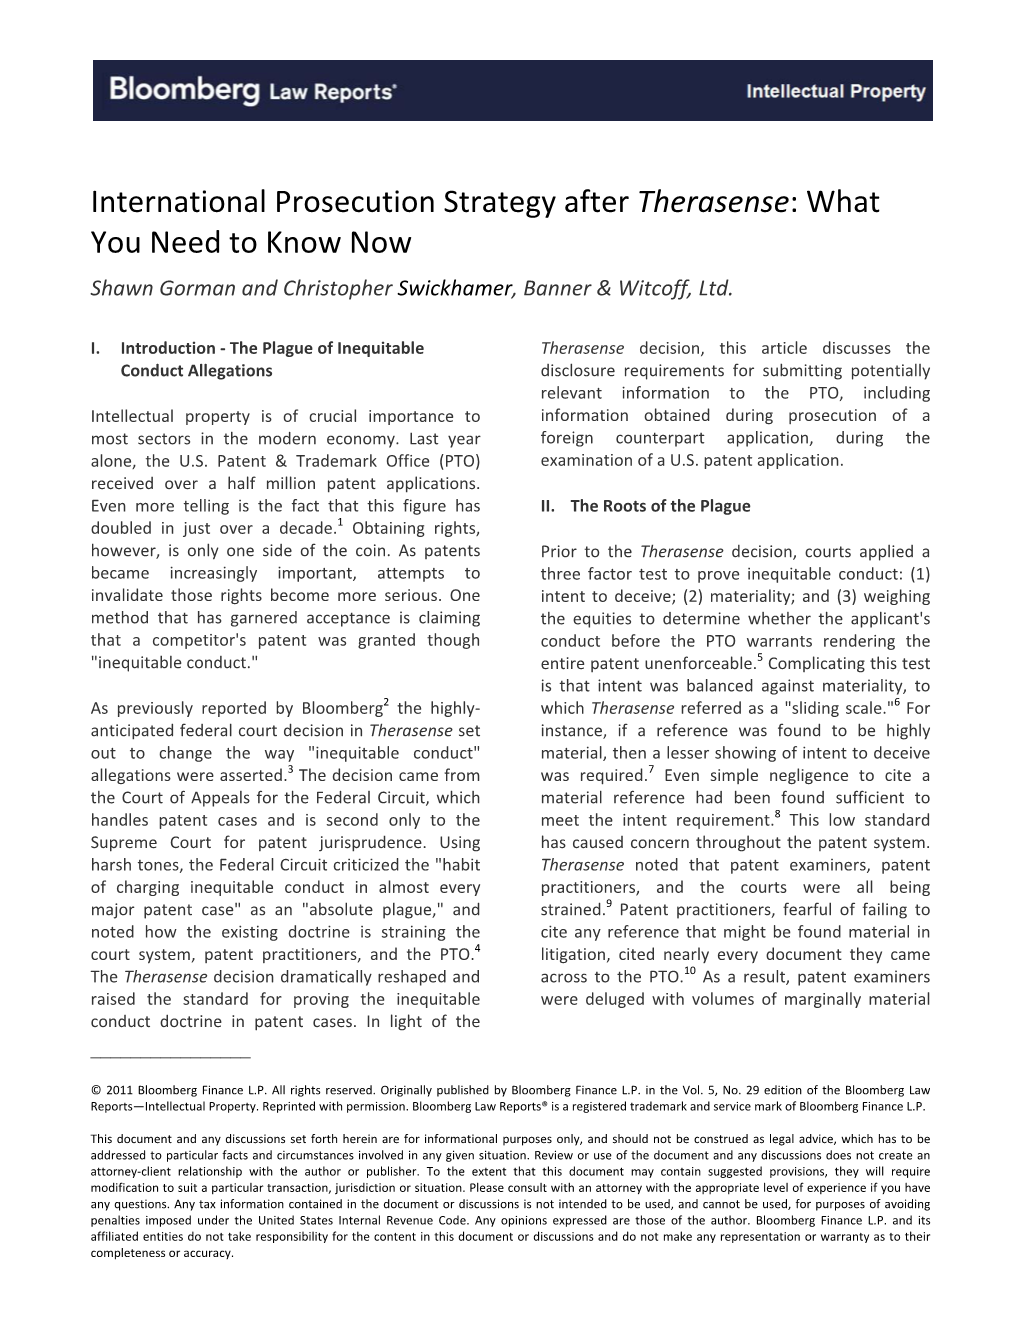 International Prosecution Strategy After Therasense: What You Need to Know Now Shawn Gorman and Christopher Swickhamer, Banner & Witcoff, Ltd